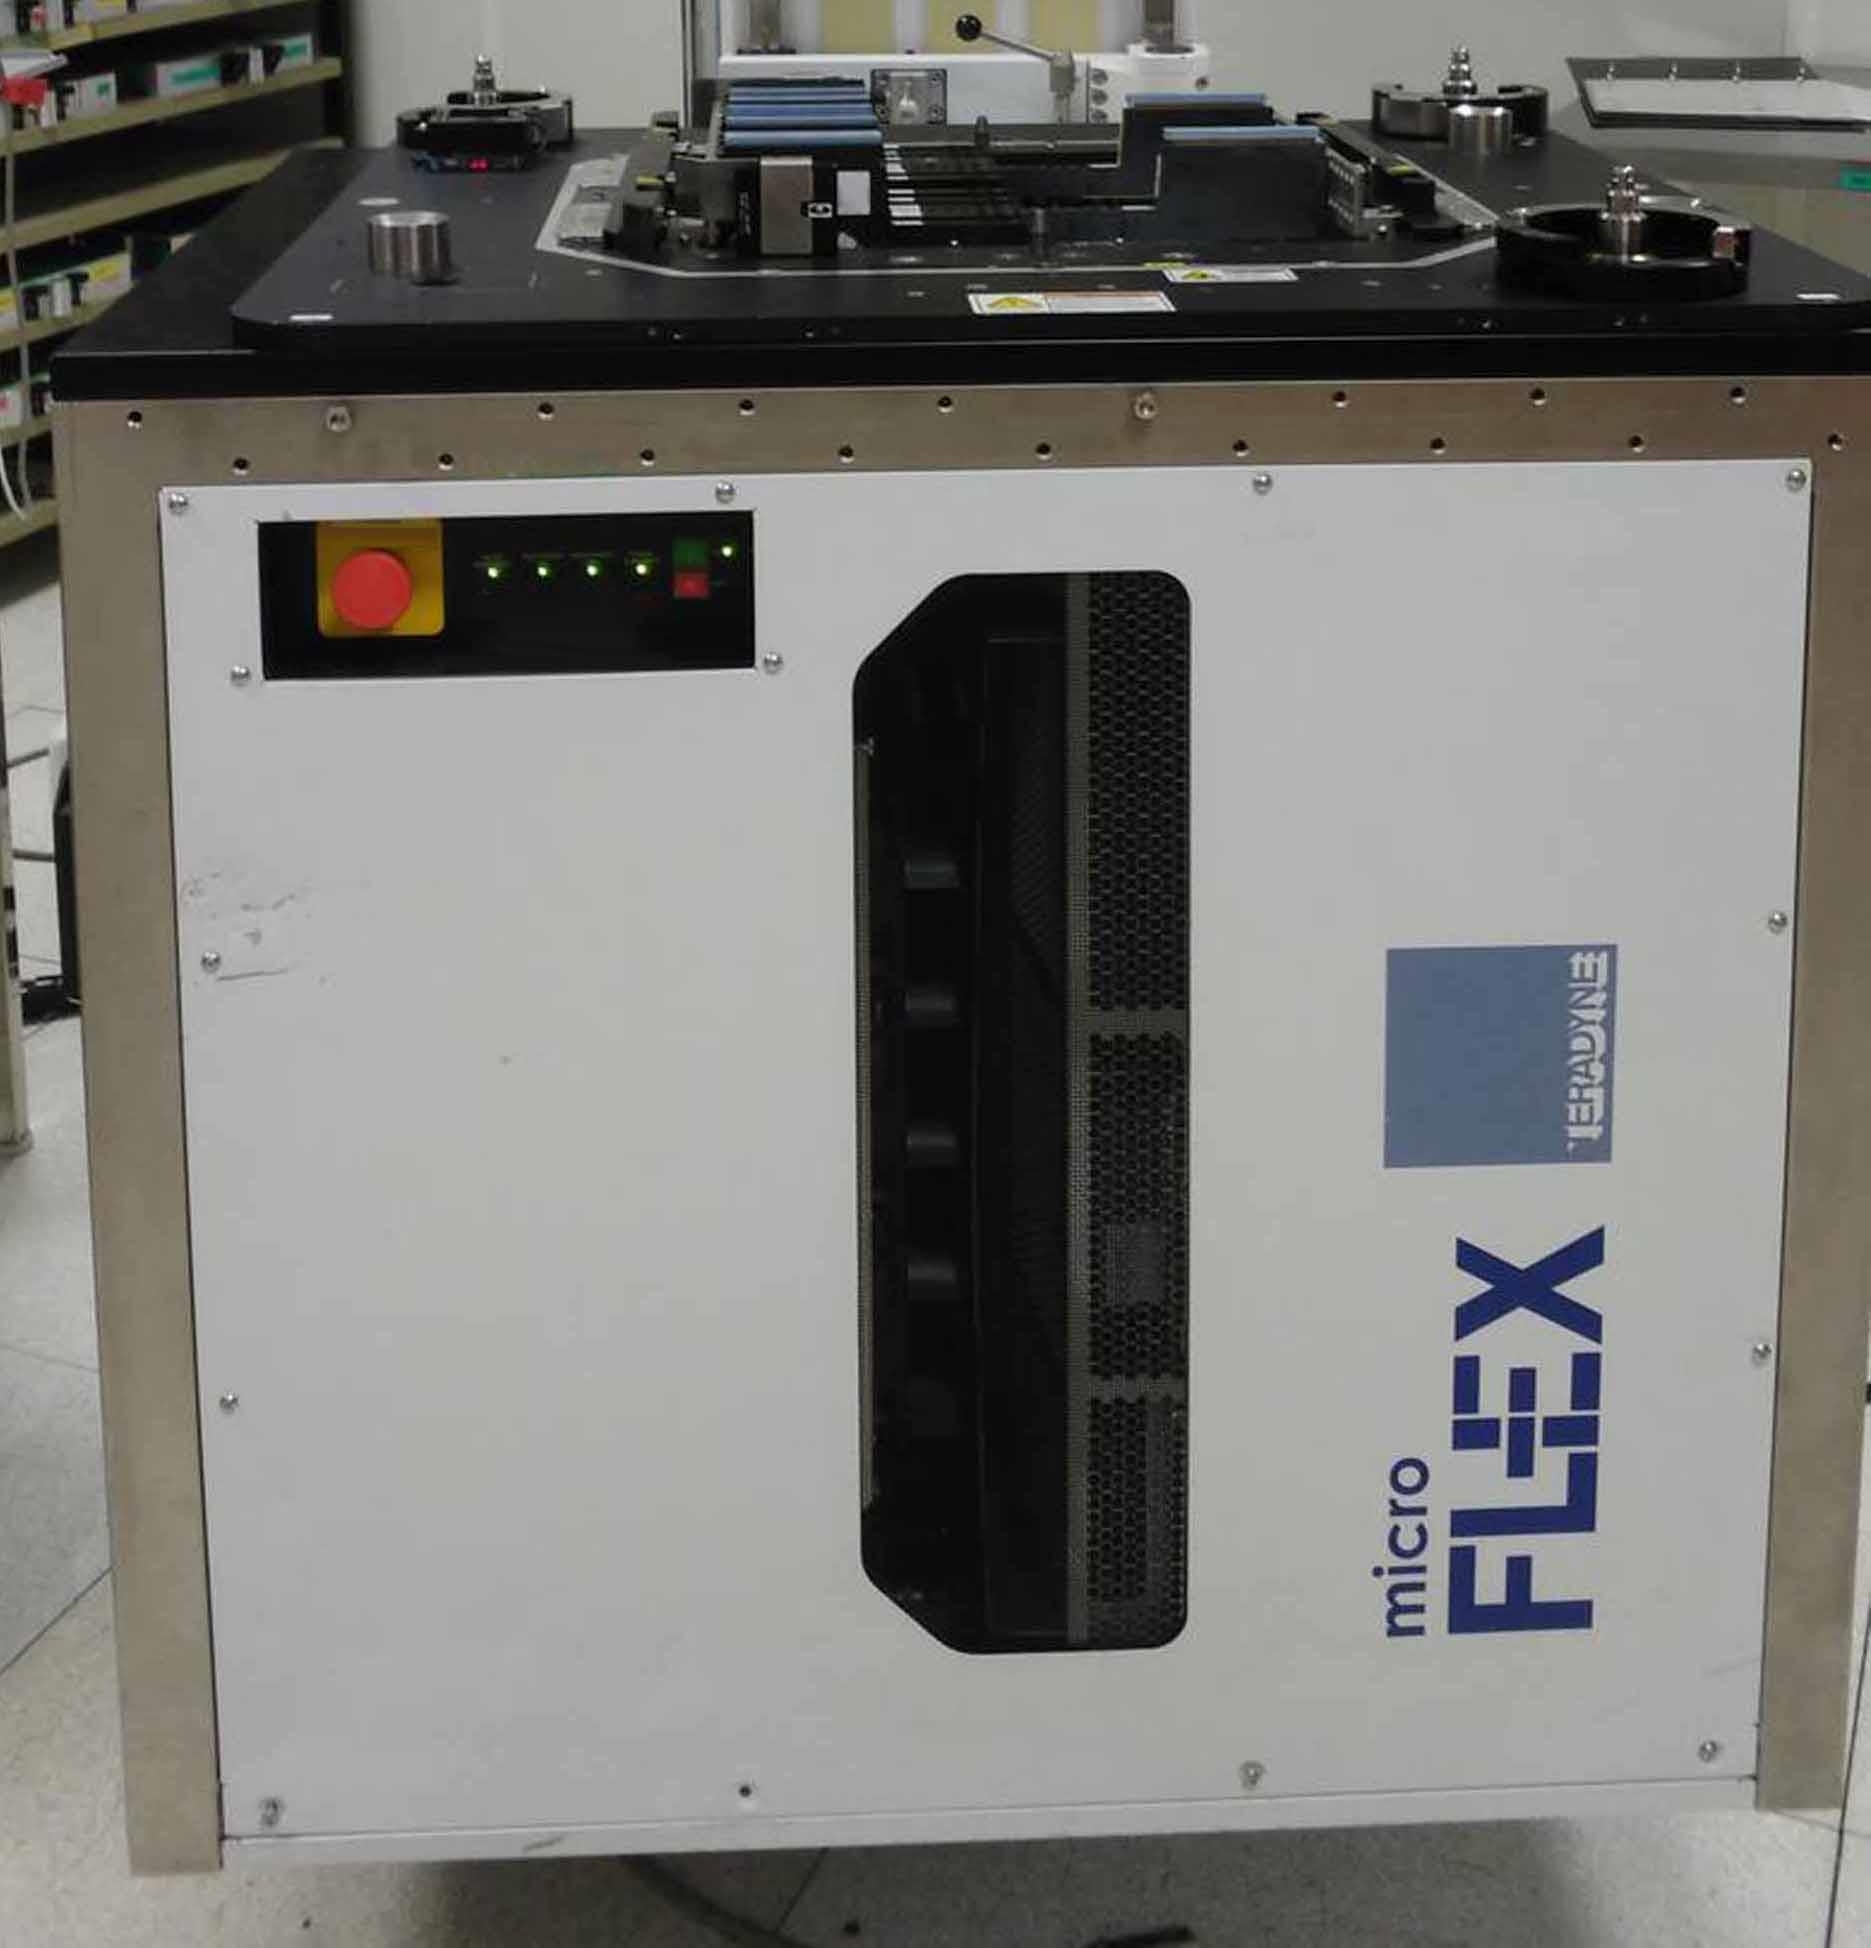 TERADYNE MicroFlex Final Testing Equipment used for sale price #9217592 >  buy from CAE